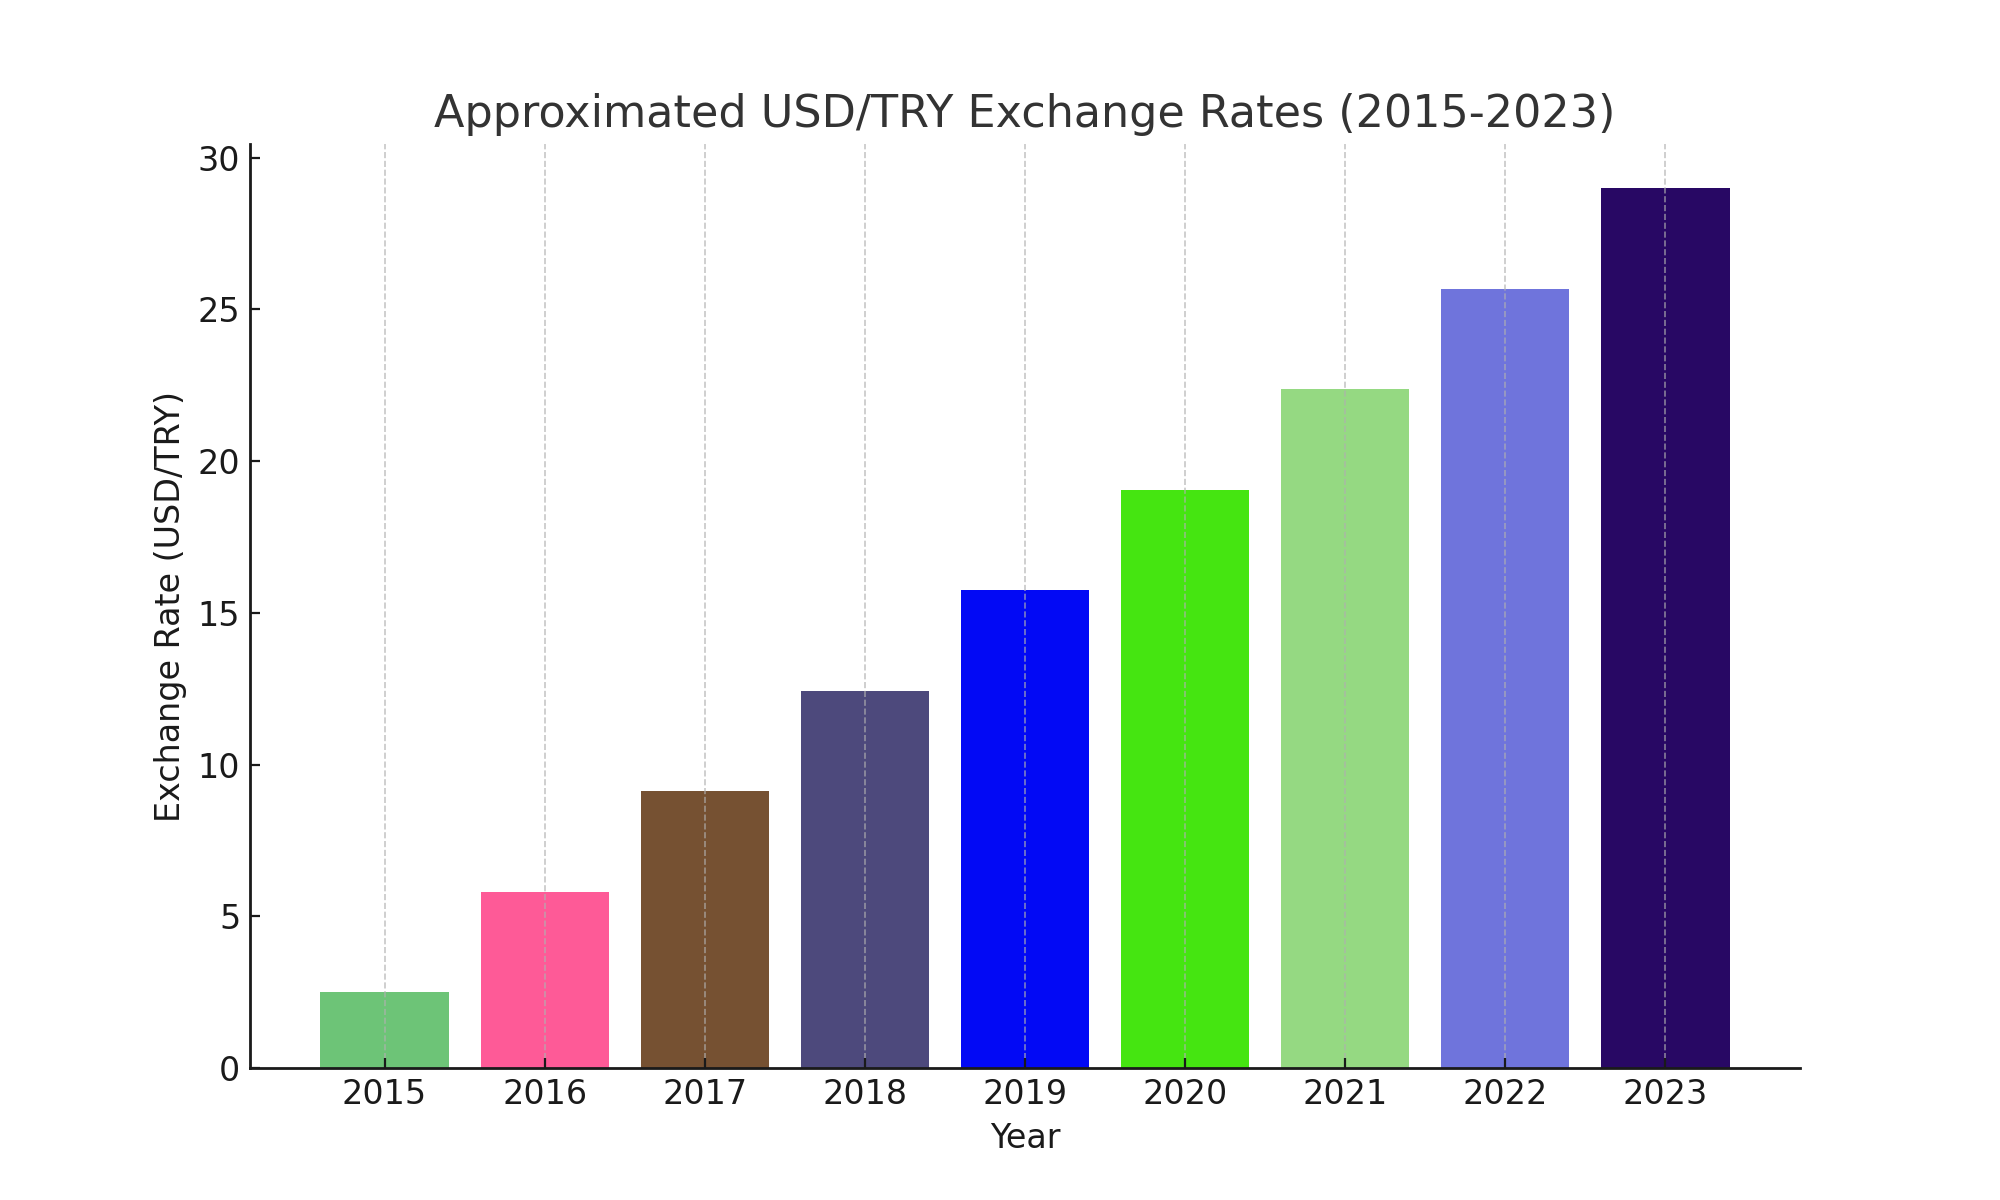 approximated USD / TRY exchange rate by Homes Gravity from 2015